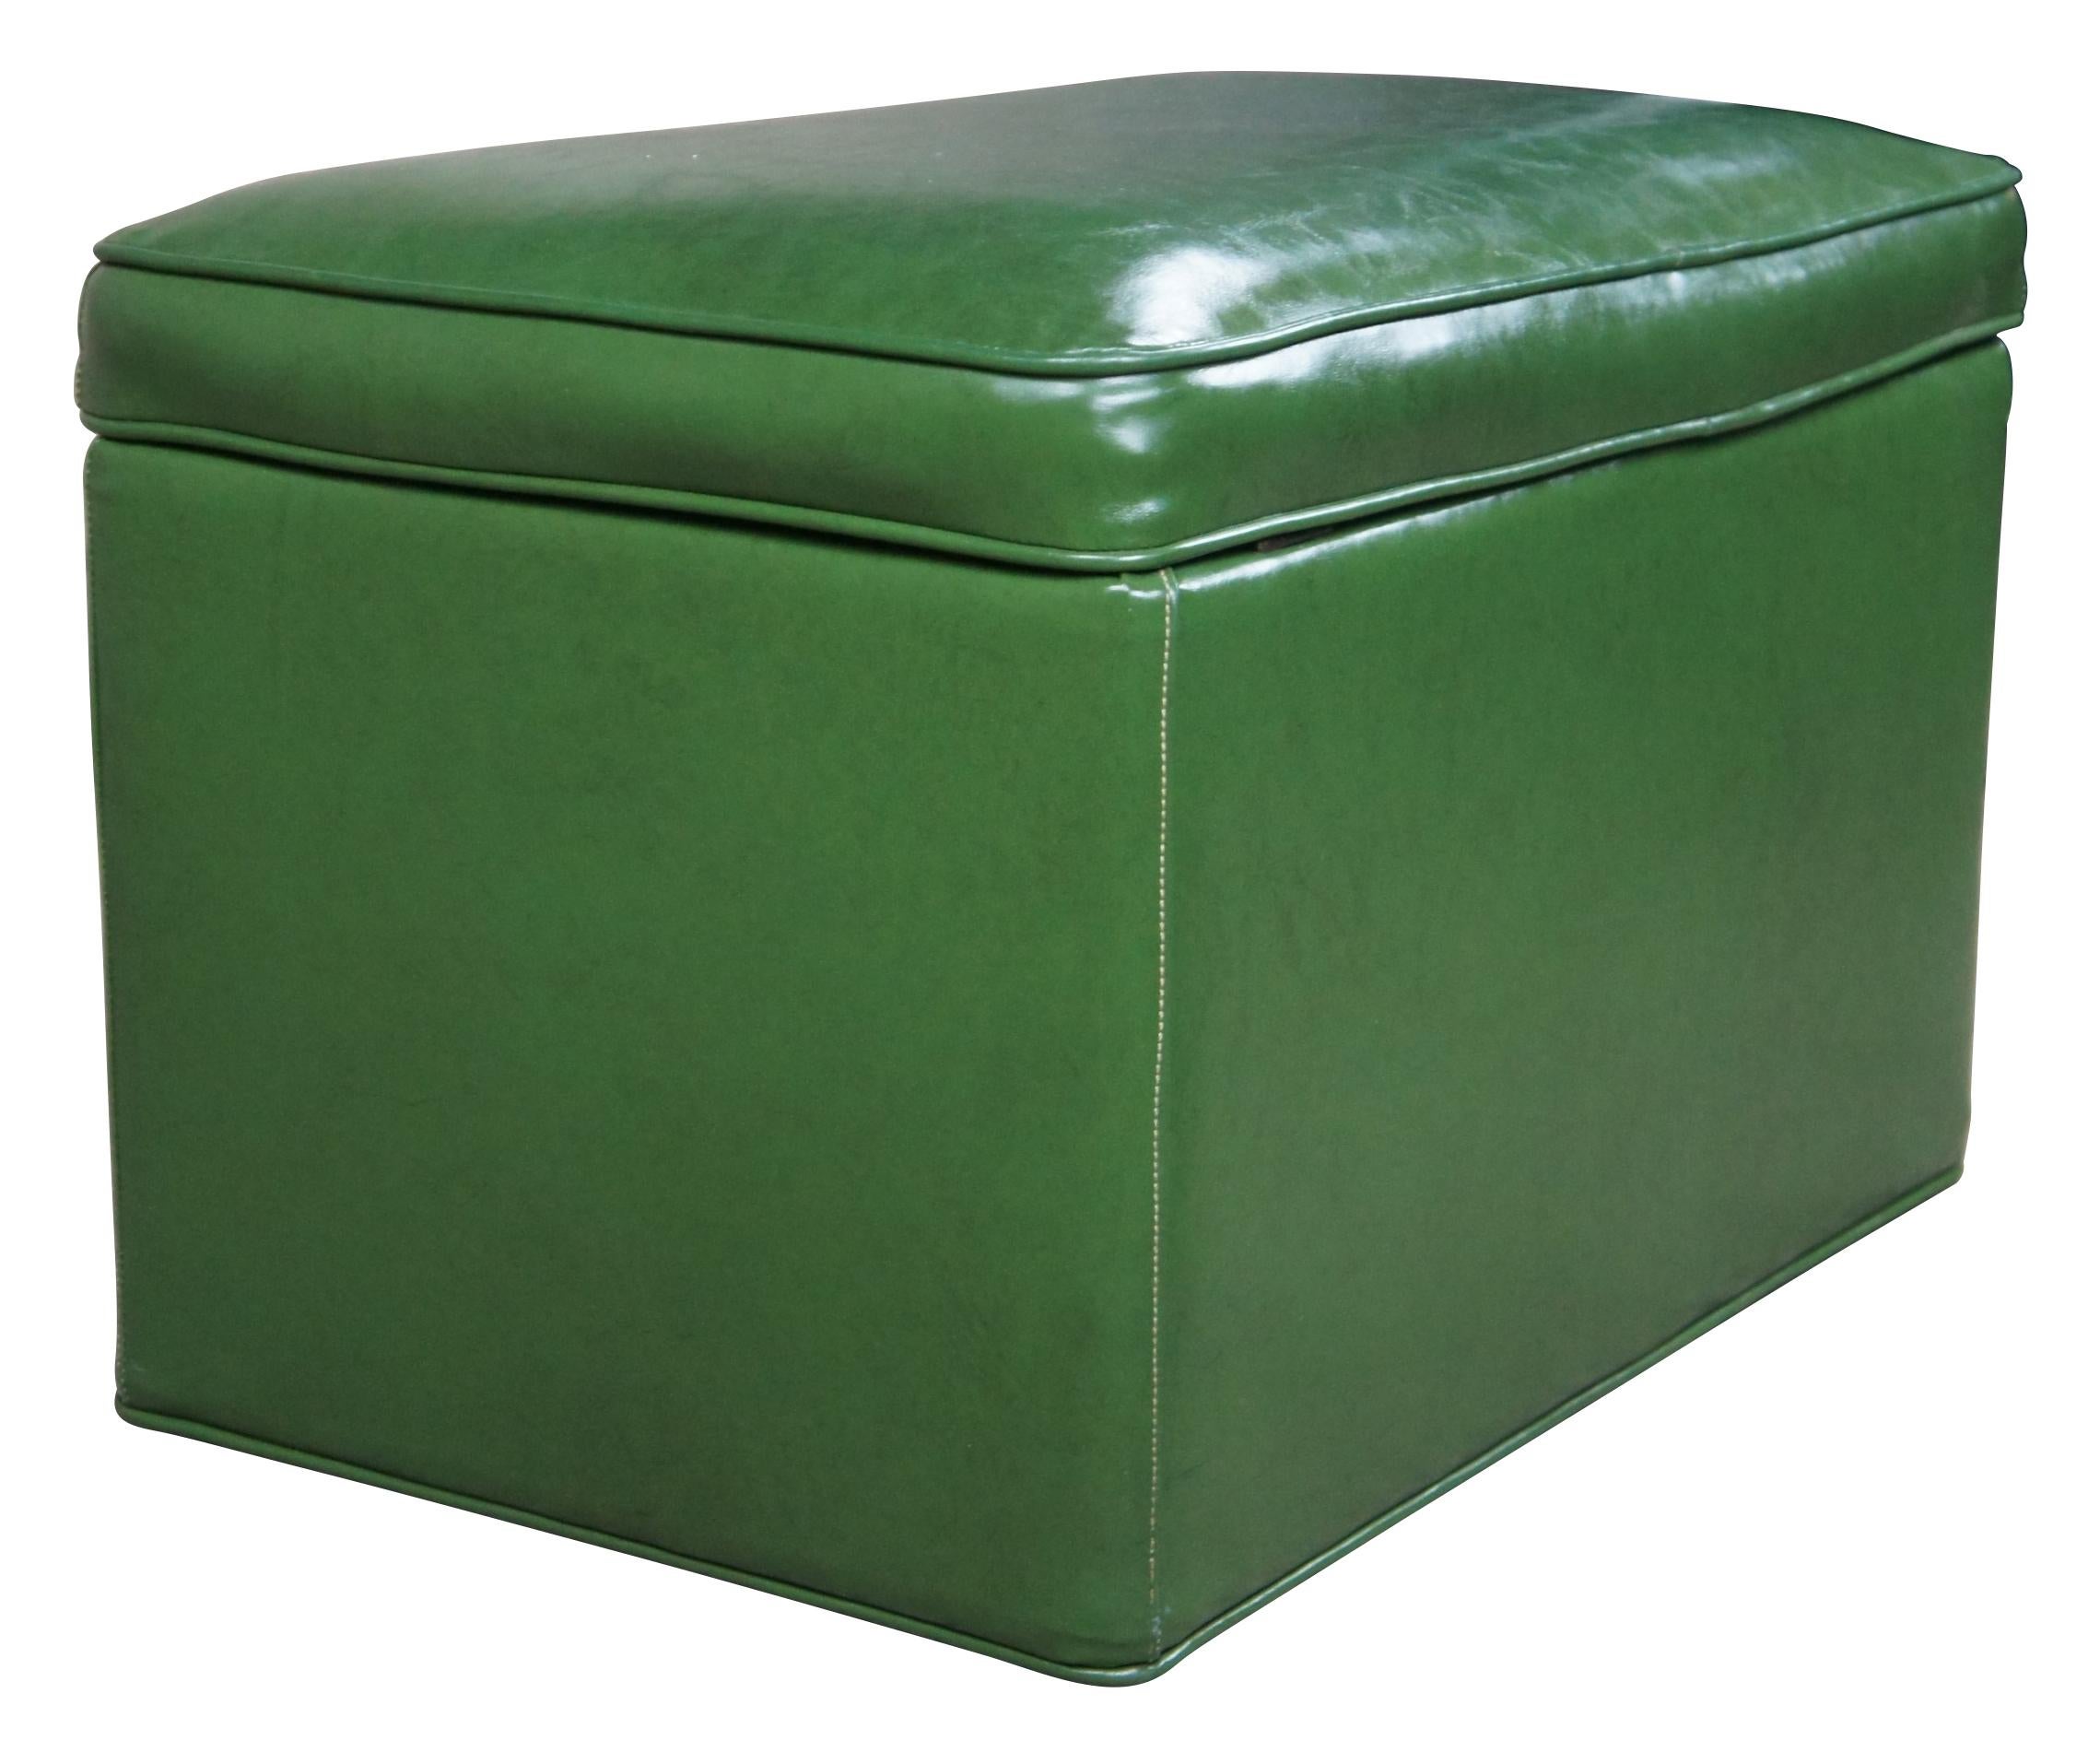 Mid Century green vinyl footstool. A rectangular form with hinged lid opening to accessory storage.